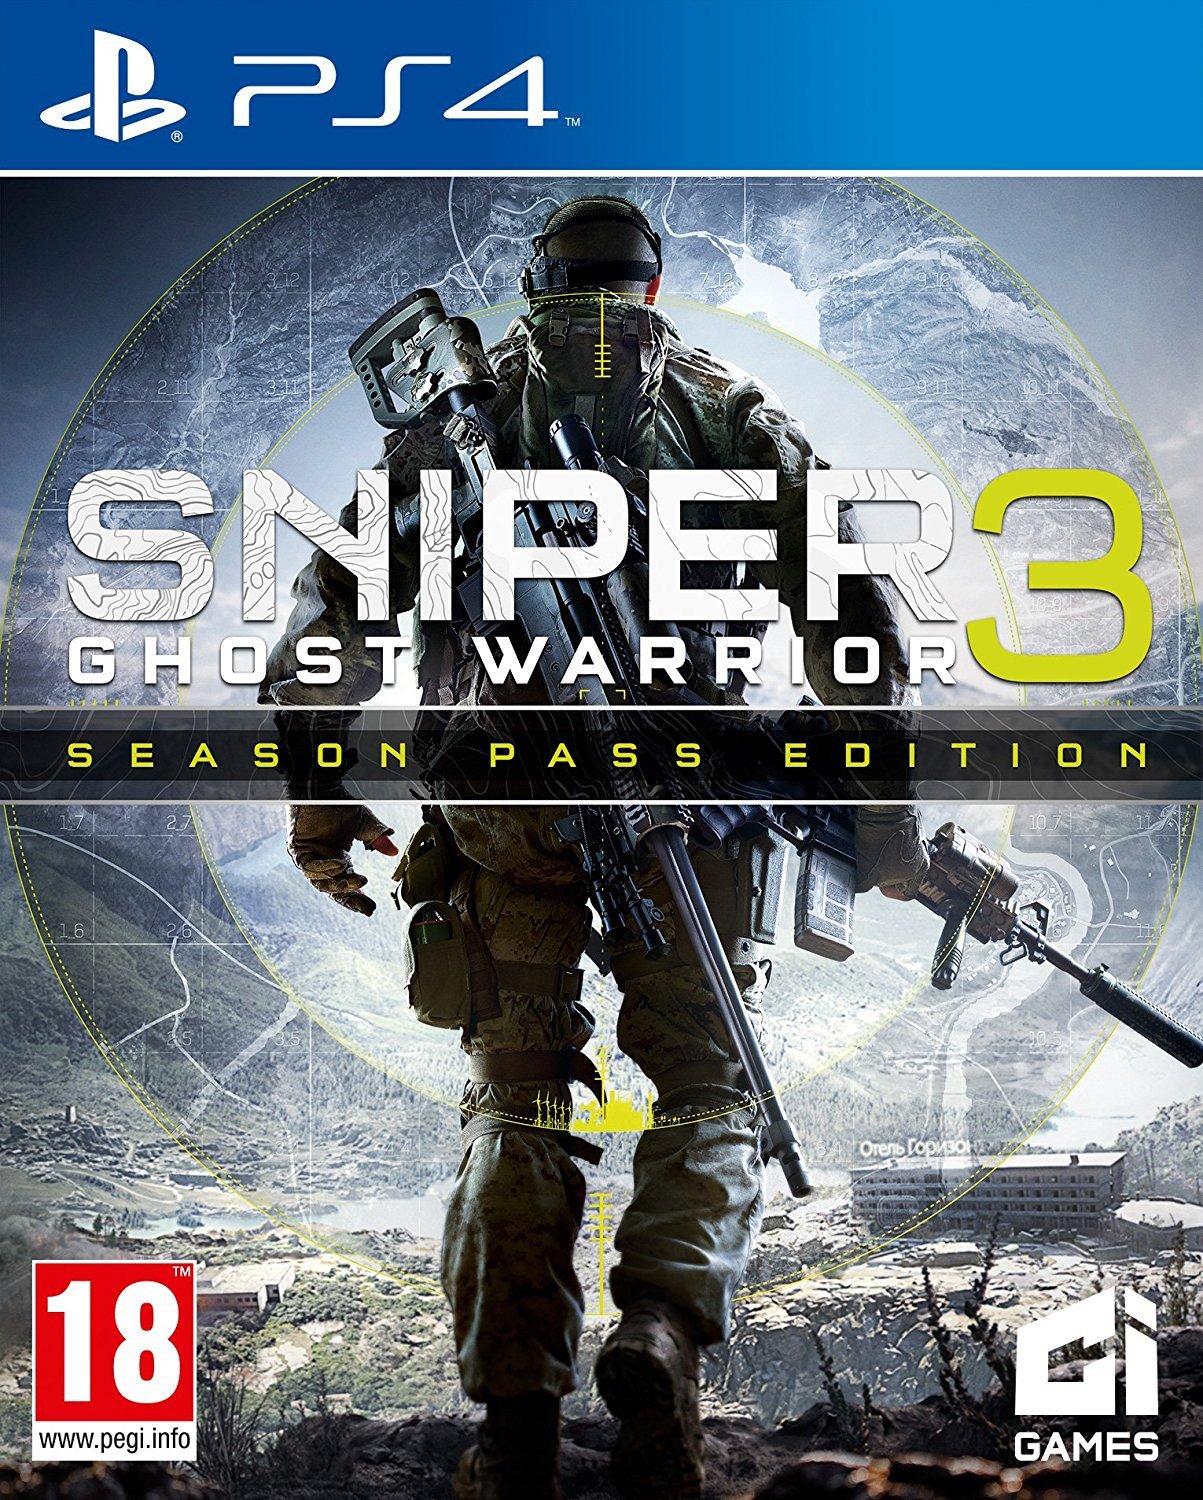 Sniper: Ghost Warrior 3 Season Pass Edition (PS4) - Offer Games